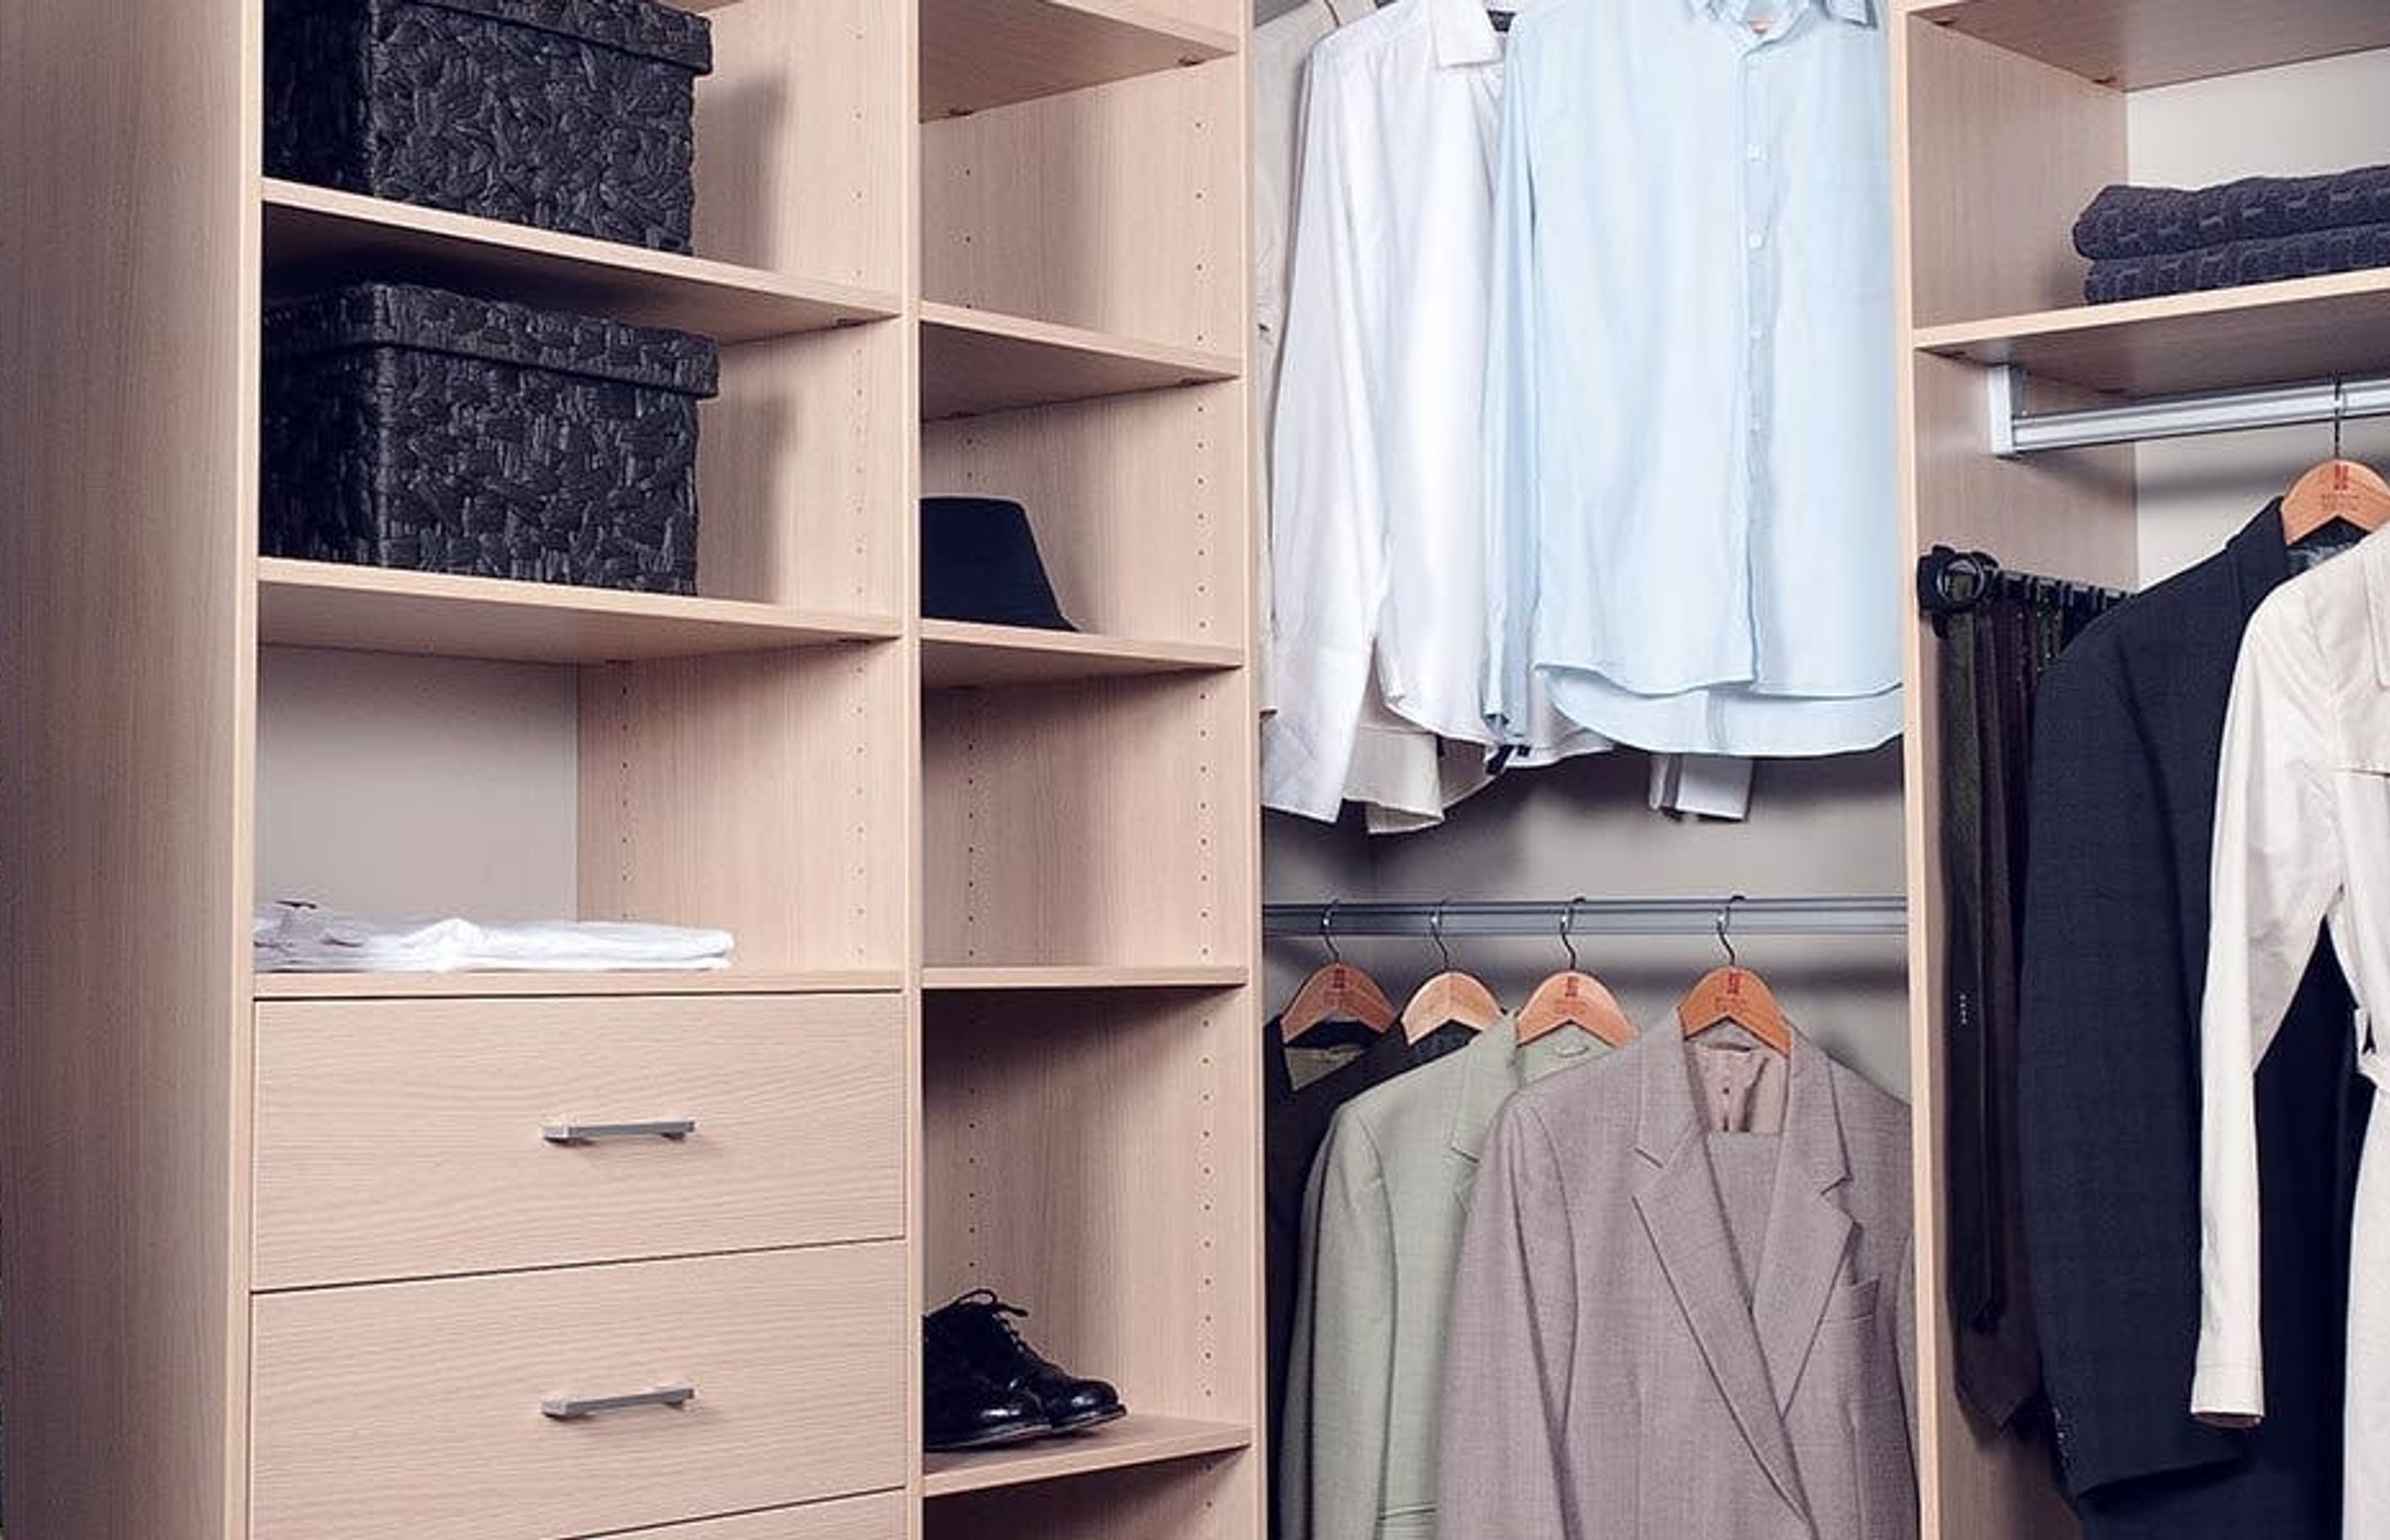 How Much Will A New Wardrobe Cost?